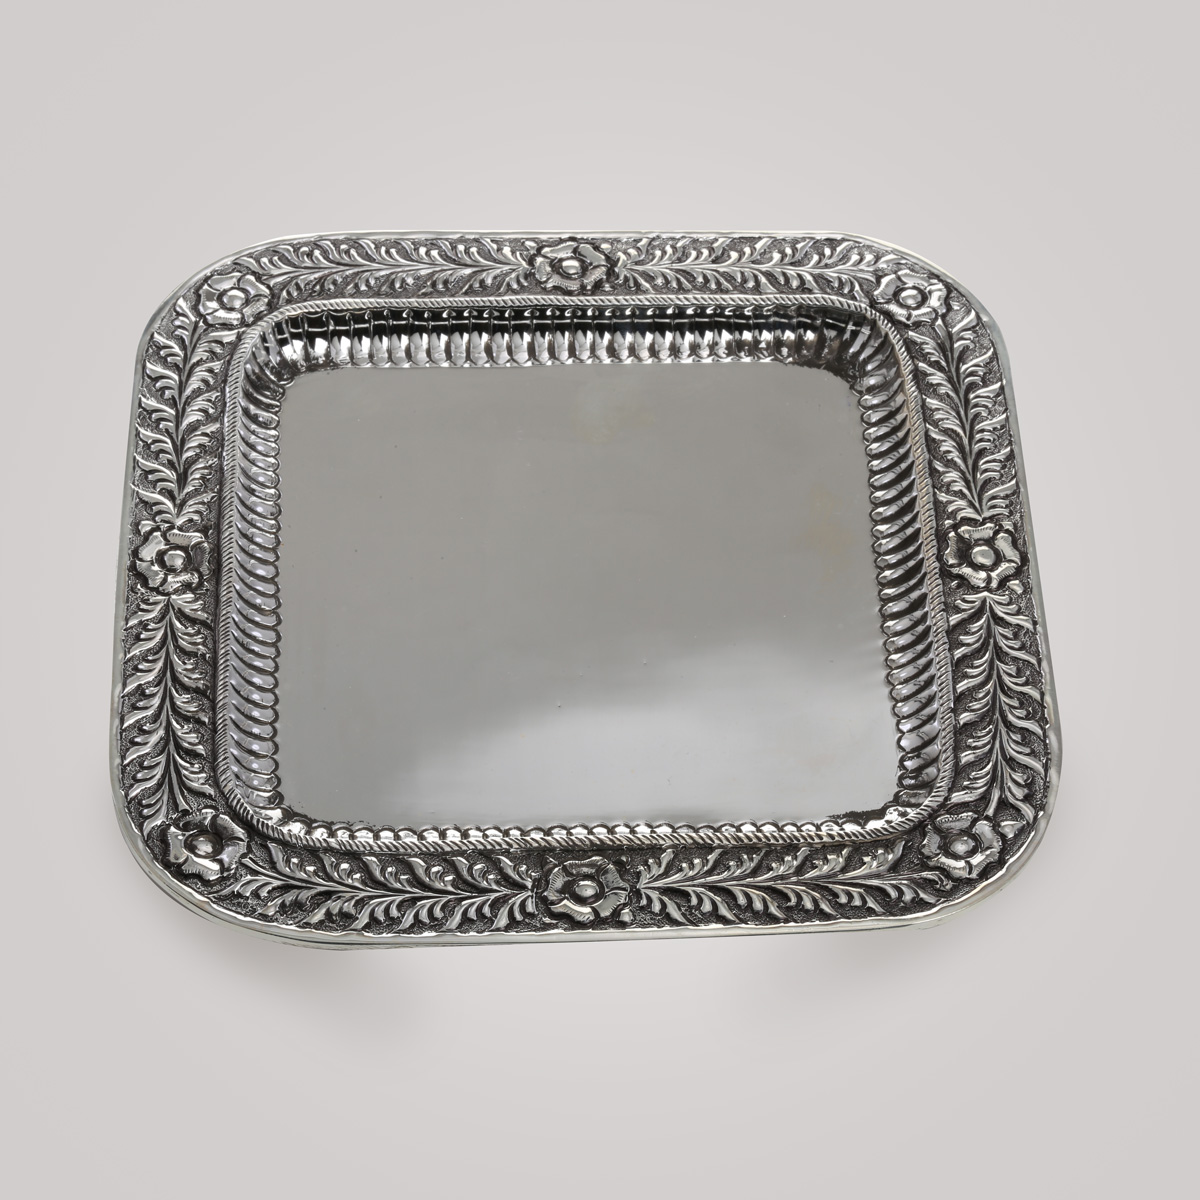 Silver Antique Plate